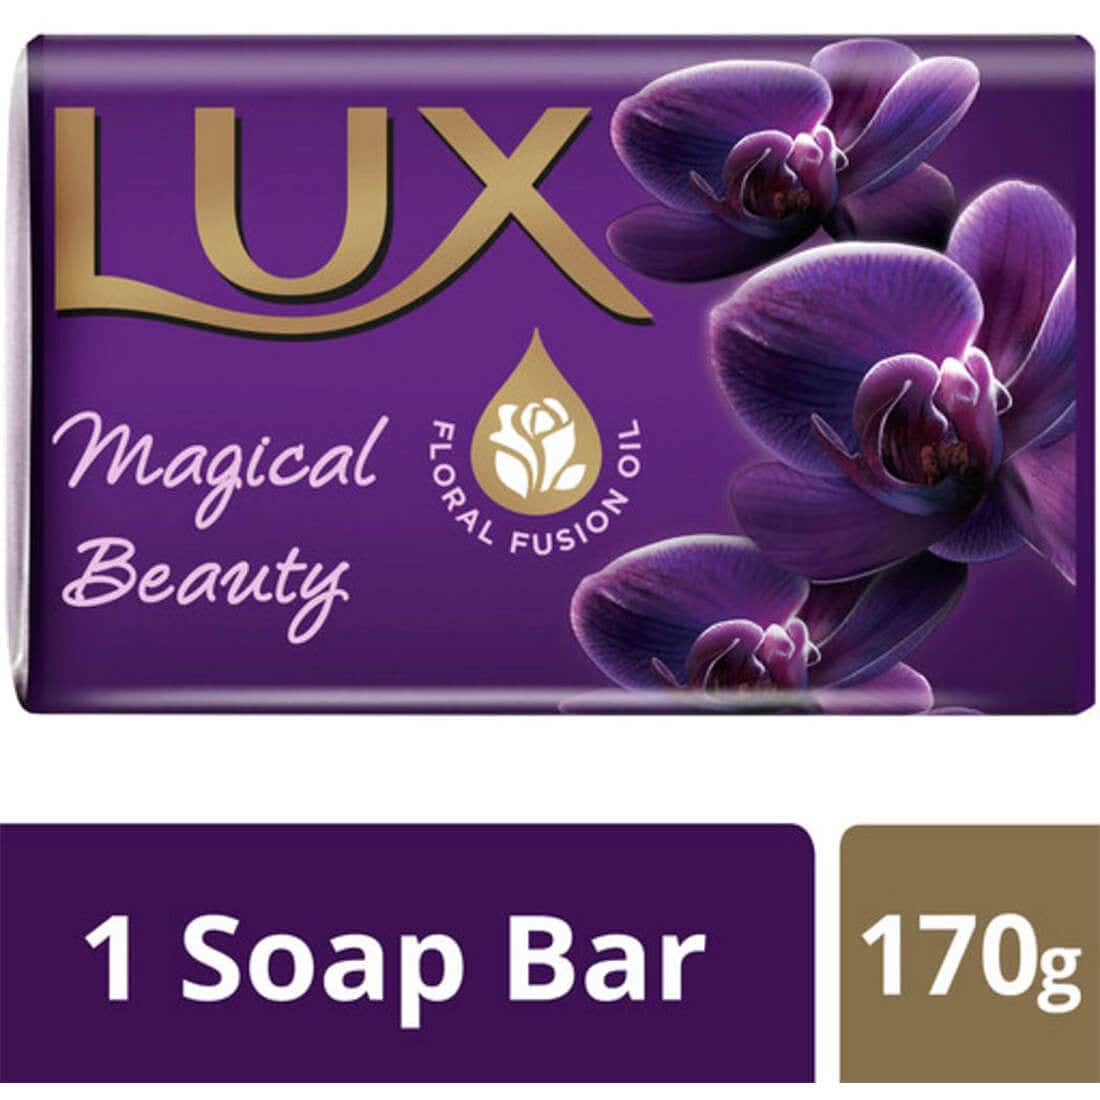 Lux Soap Magical Beauty 175/170 gm